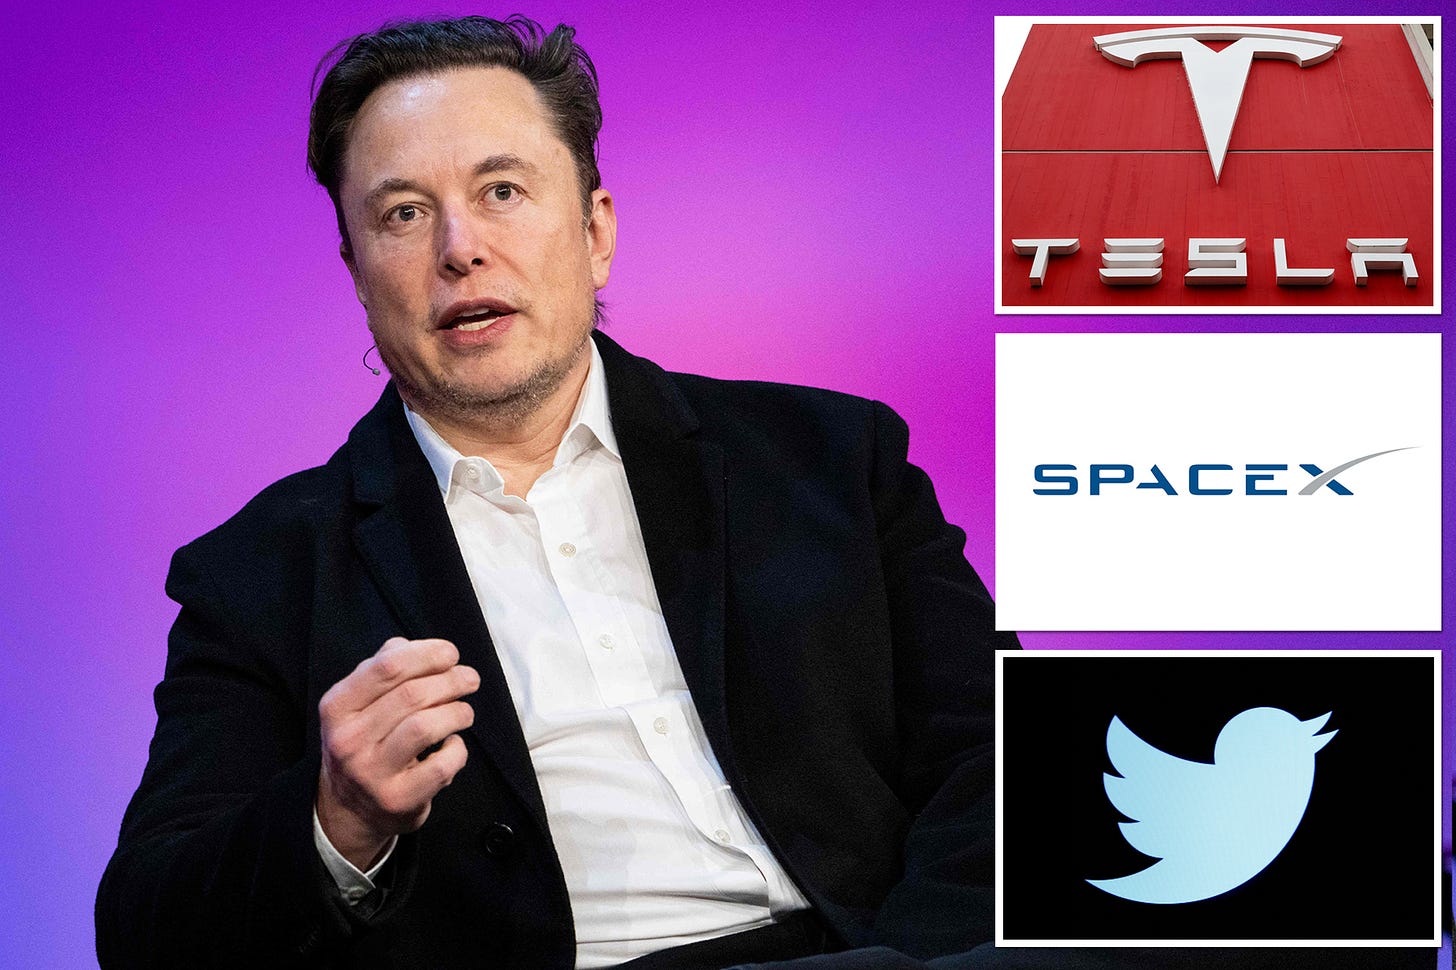 Elon Musk may combine Tesla, Twitter, SpaceX into 'X Holdings'